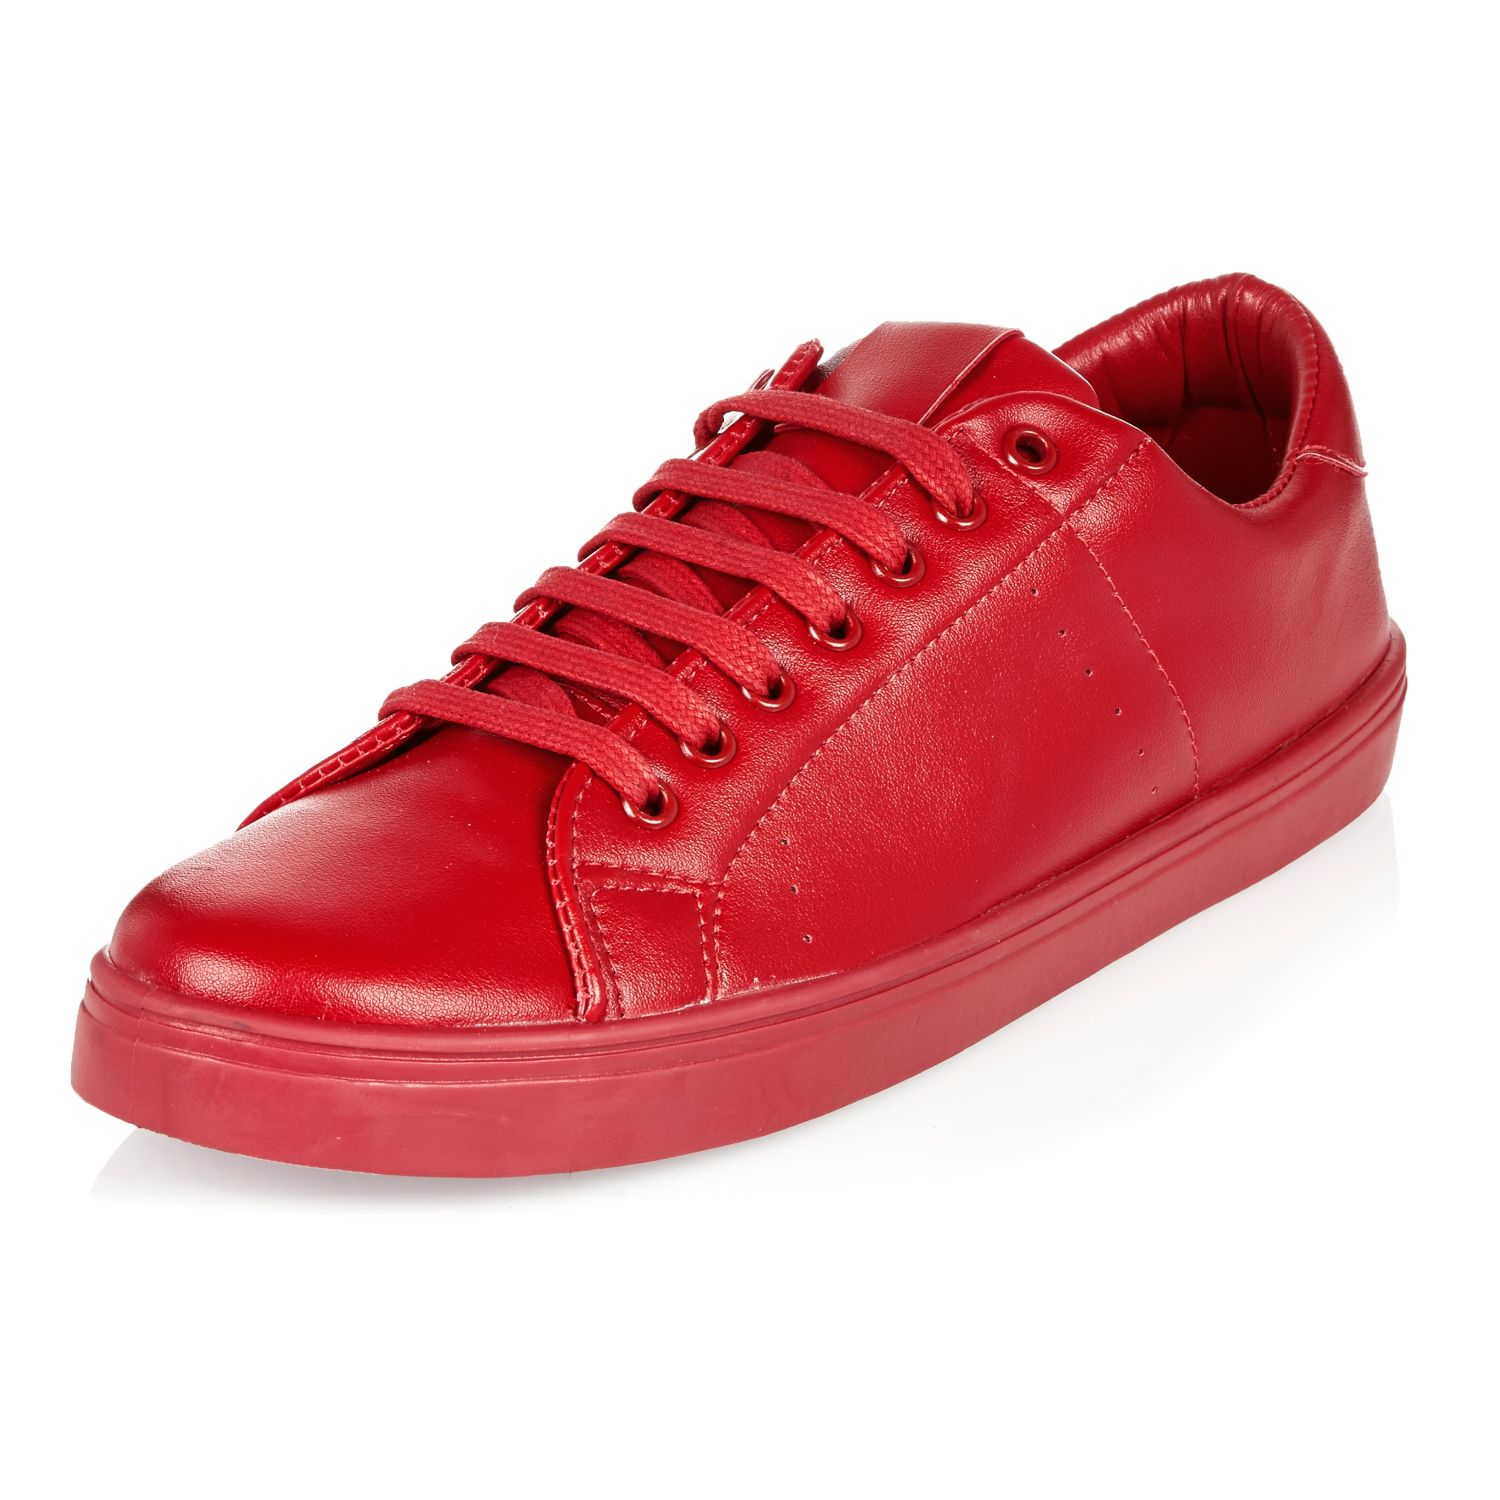 River Island Rubber Red Tonal Trainers for Men - Lyst